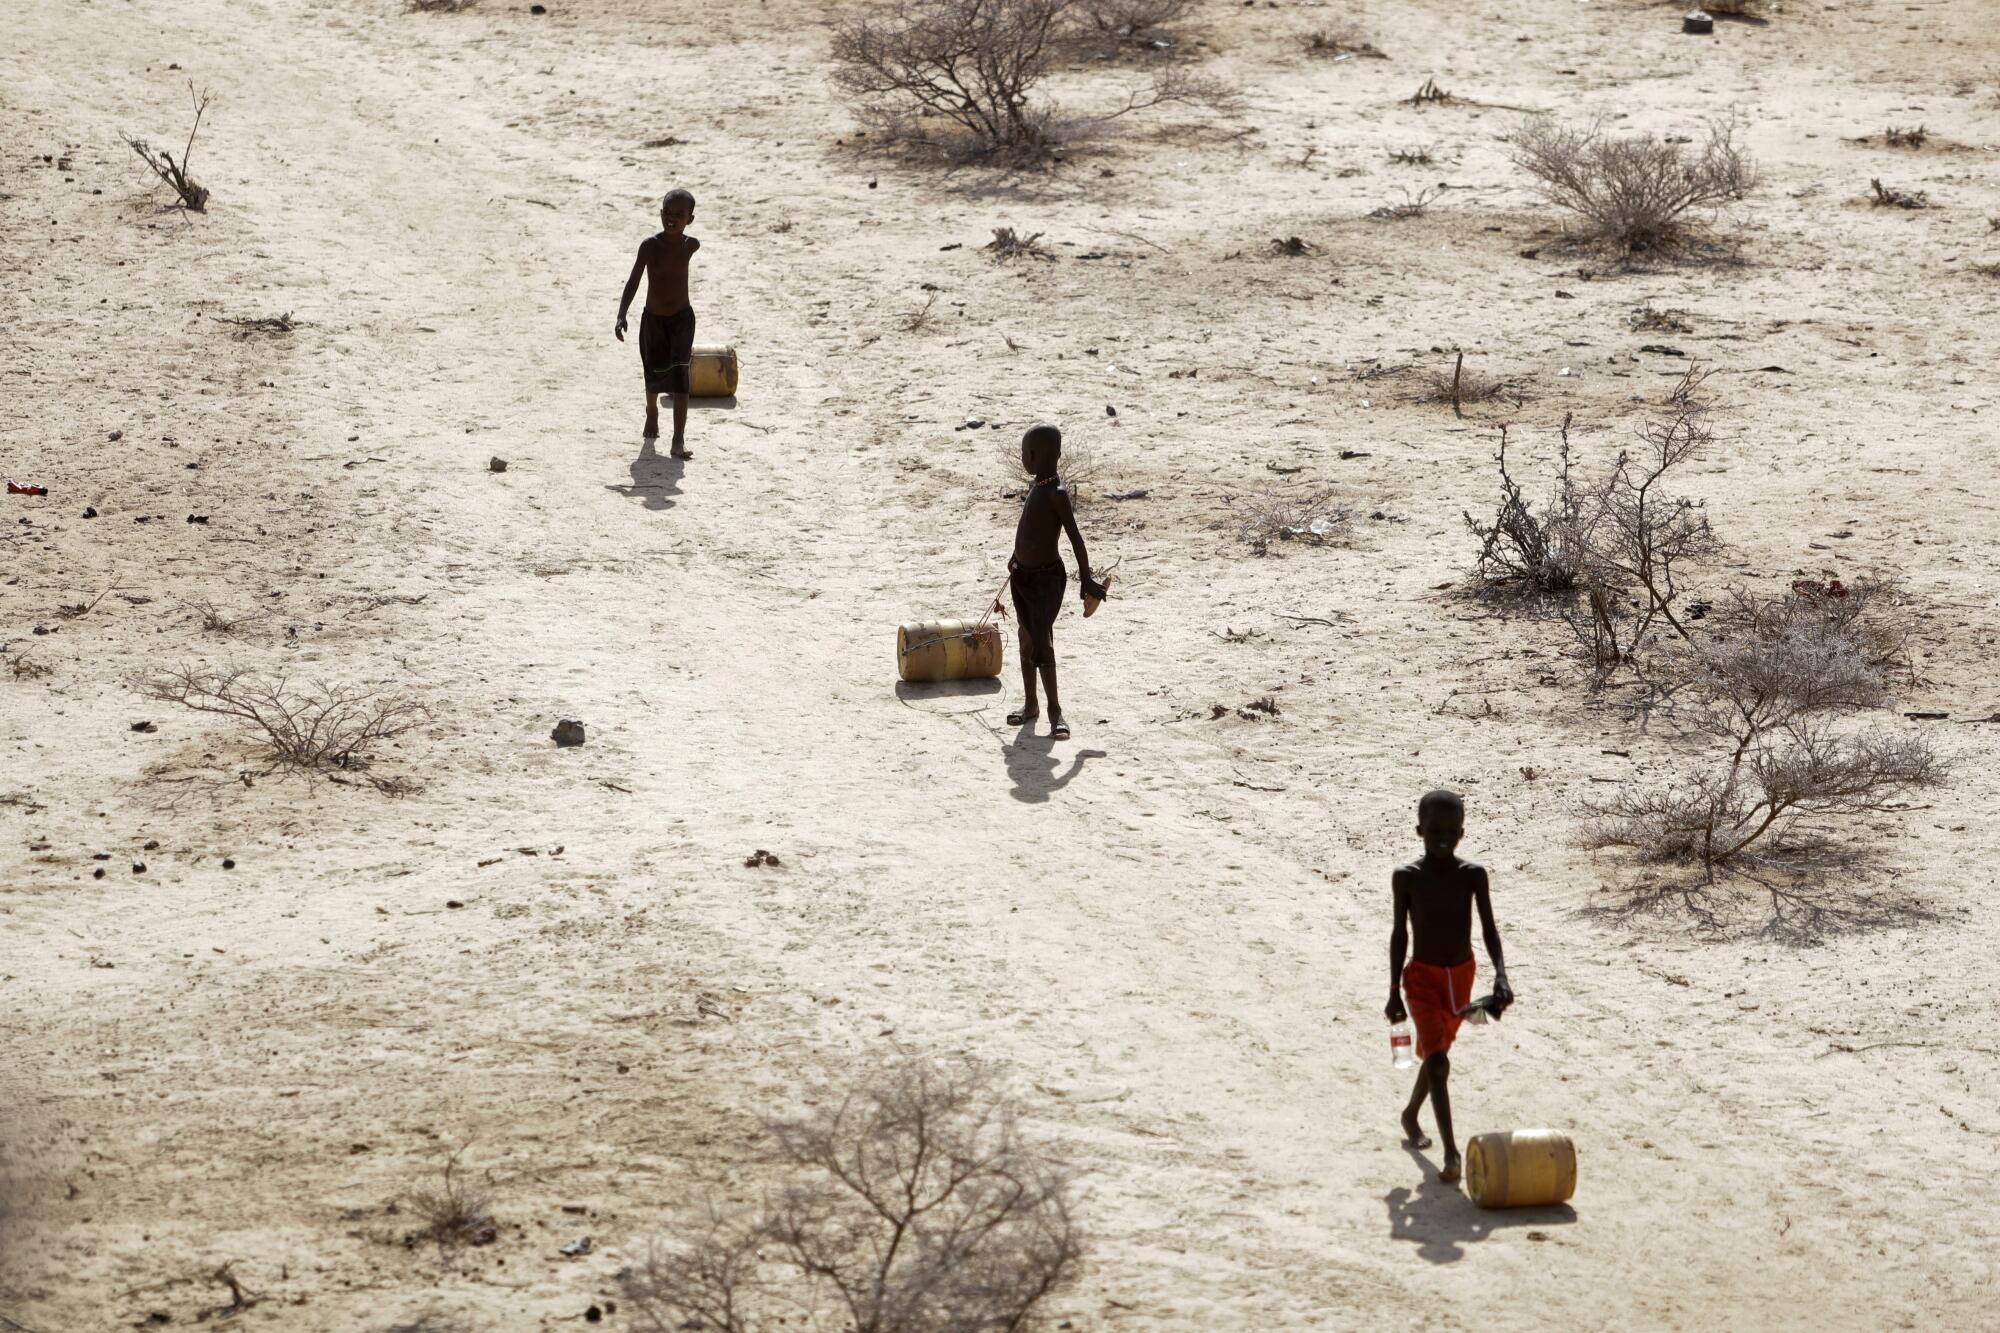 Boys pull containers filled with water along a dusty path.